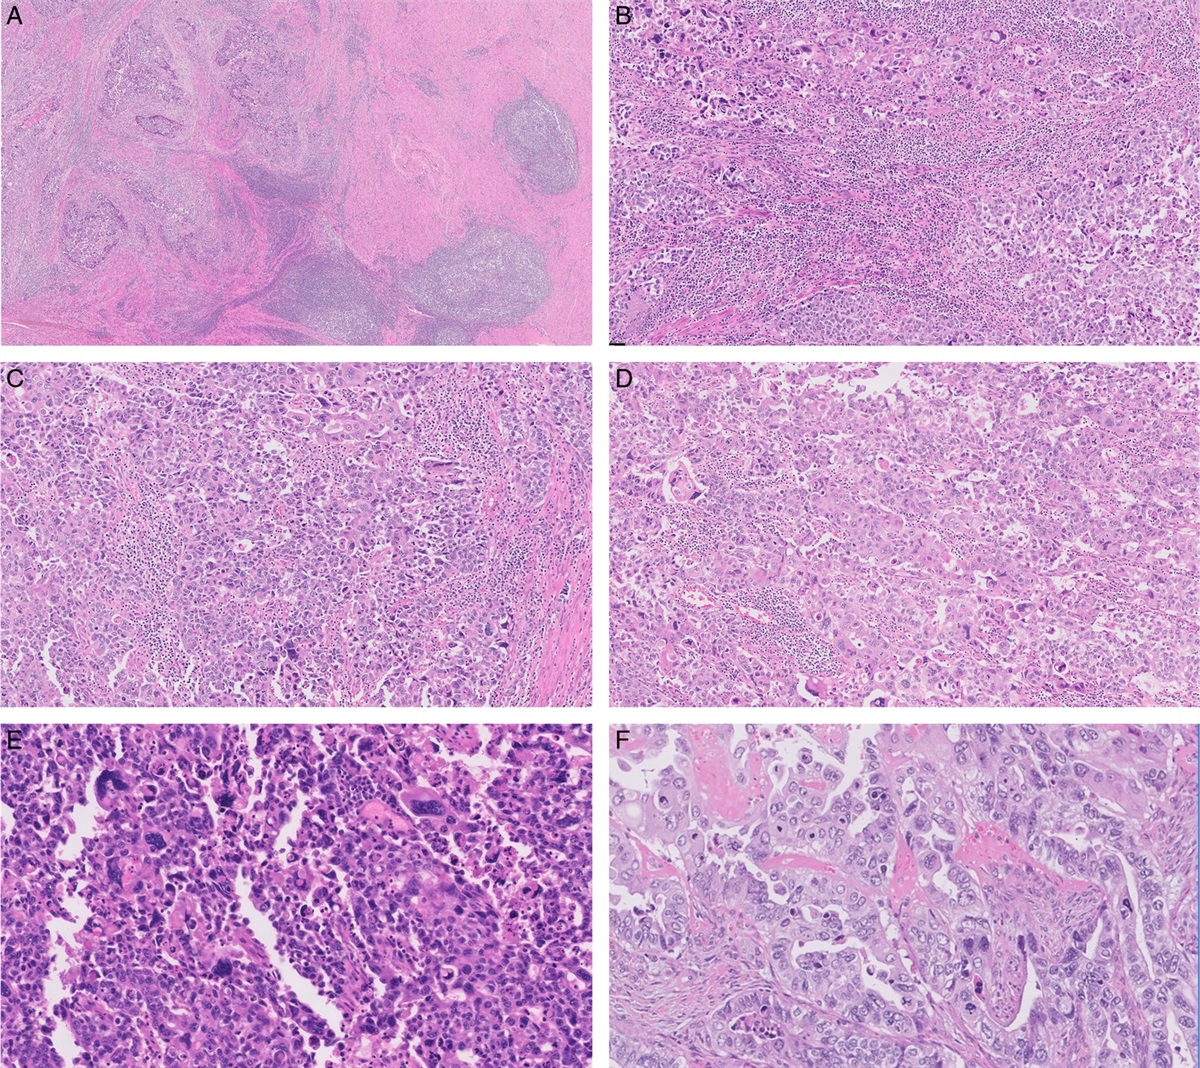 Specific Pathology Features Enrich Selection of Endometrial Carcinomas for POLE Testing